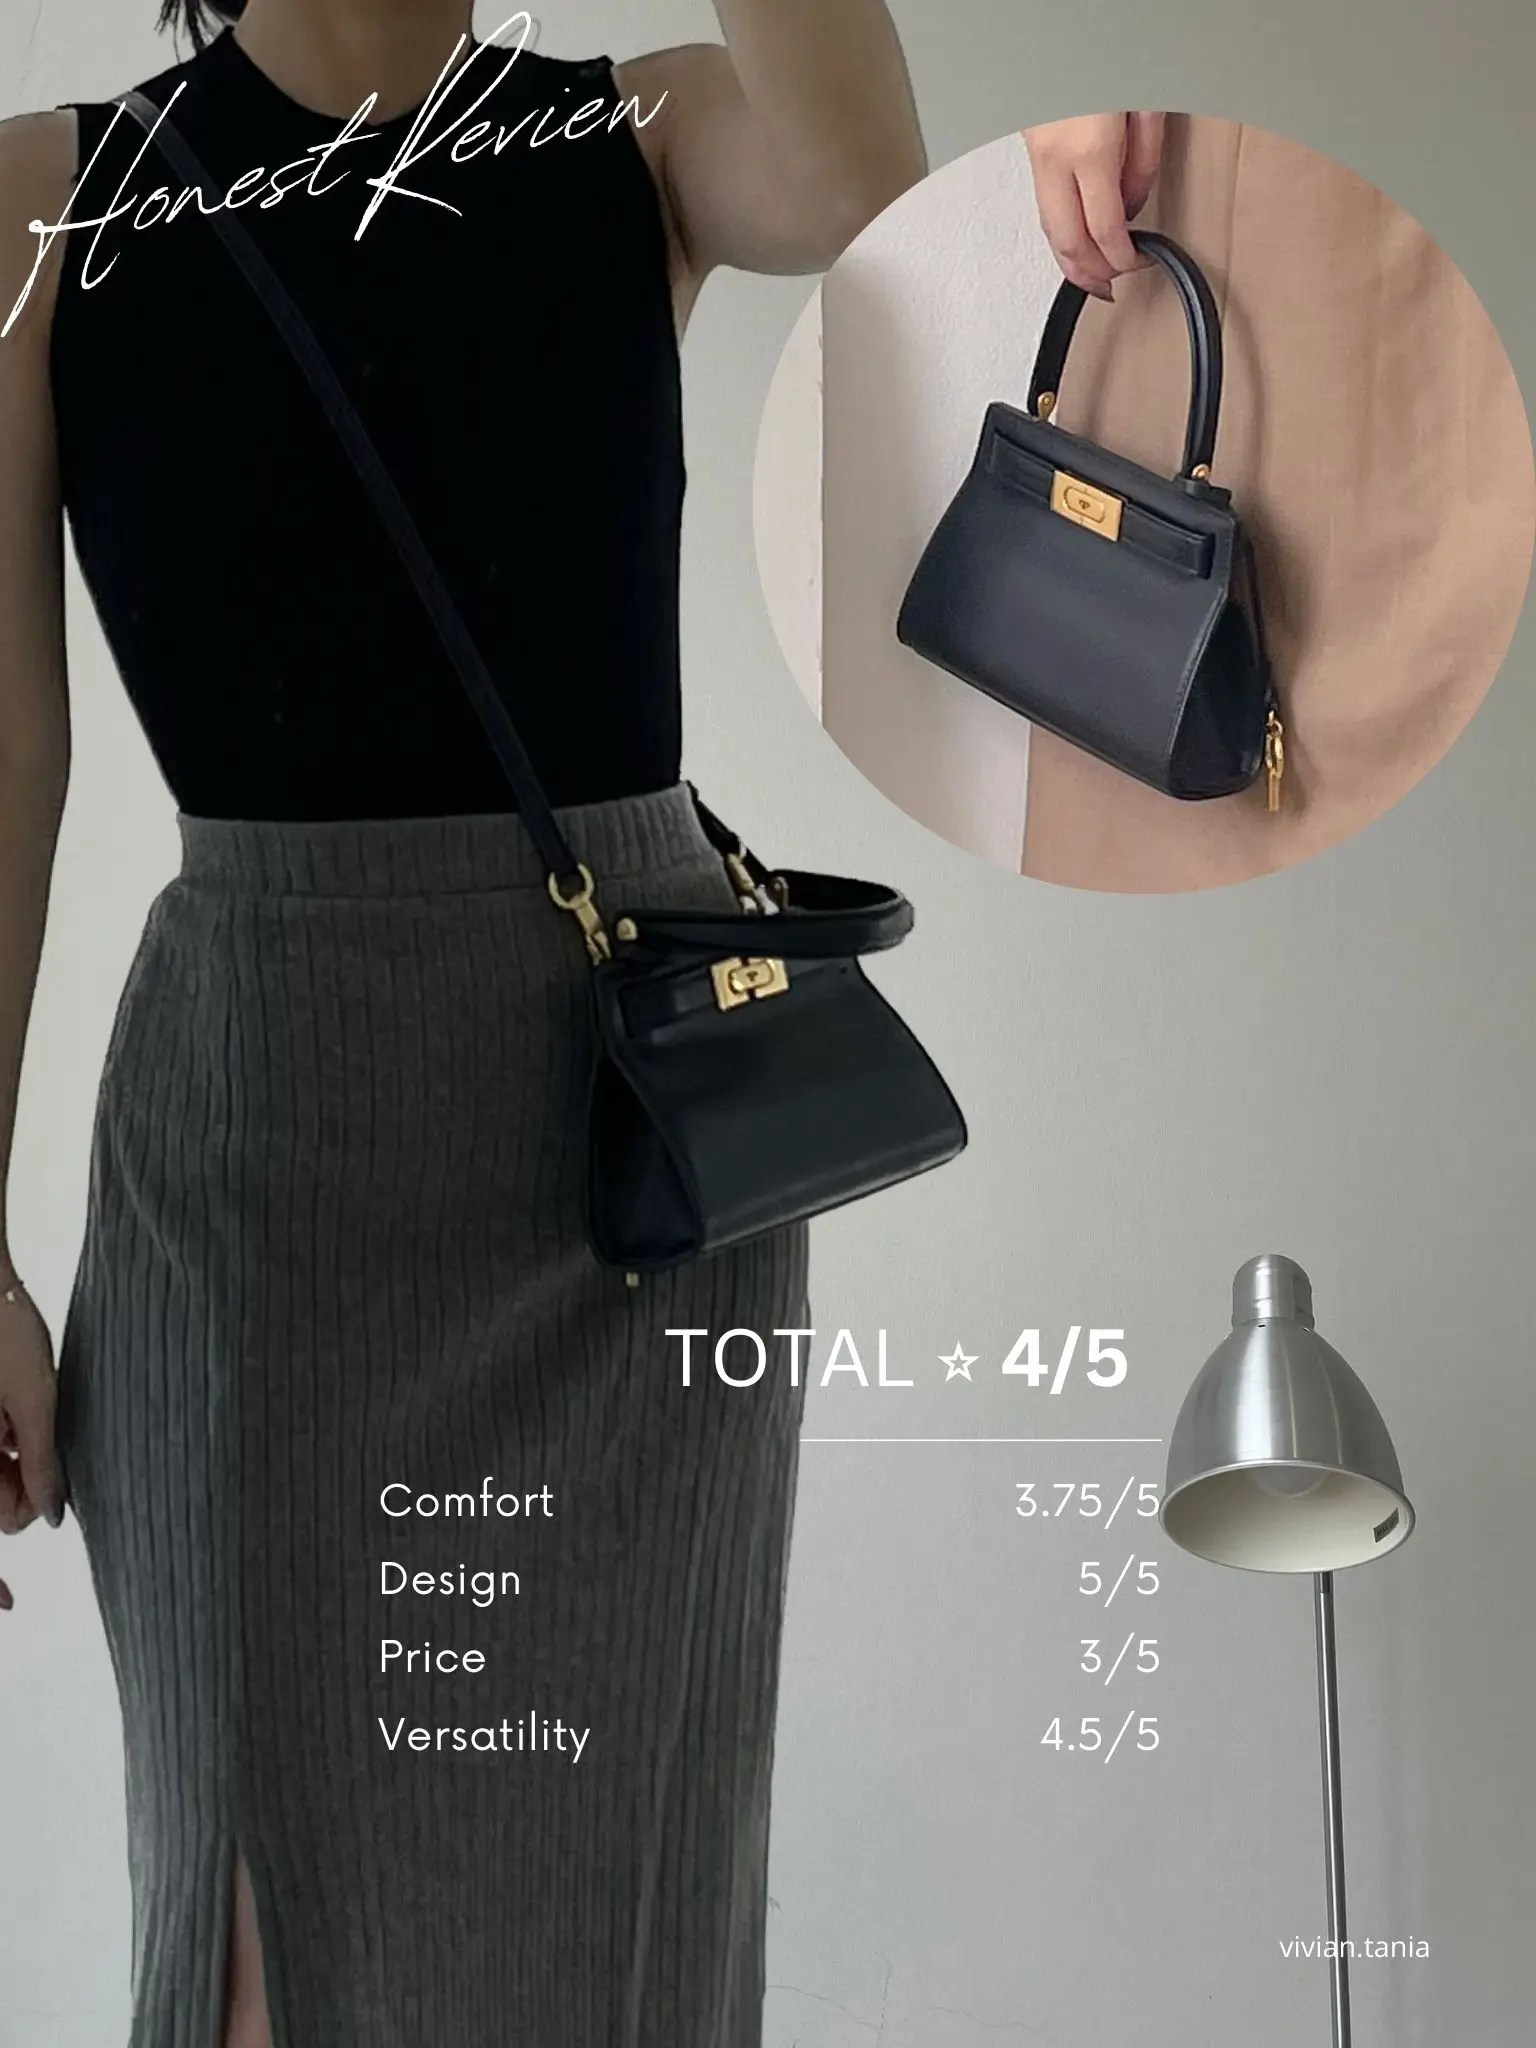 Cafune Stance Bag Review and comparison to the Tory Burch Lee Radziwill Bag  (Updated January 2022) — Fairly Curated